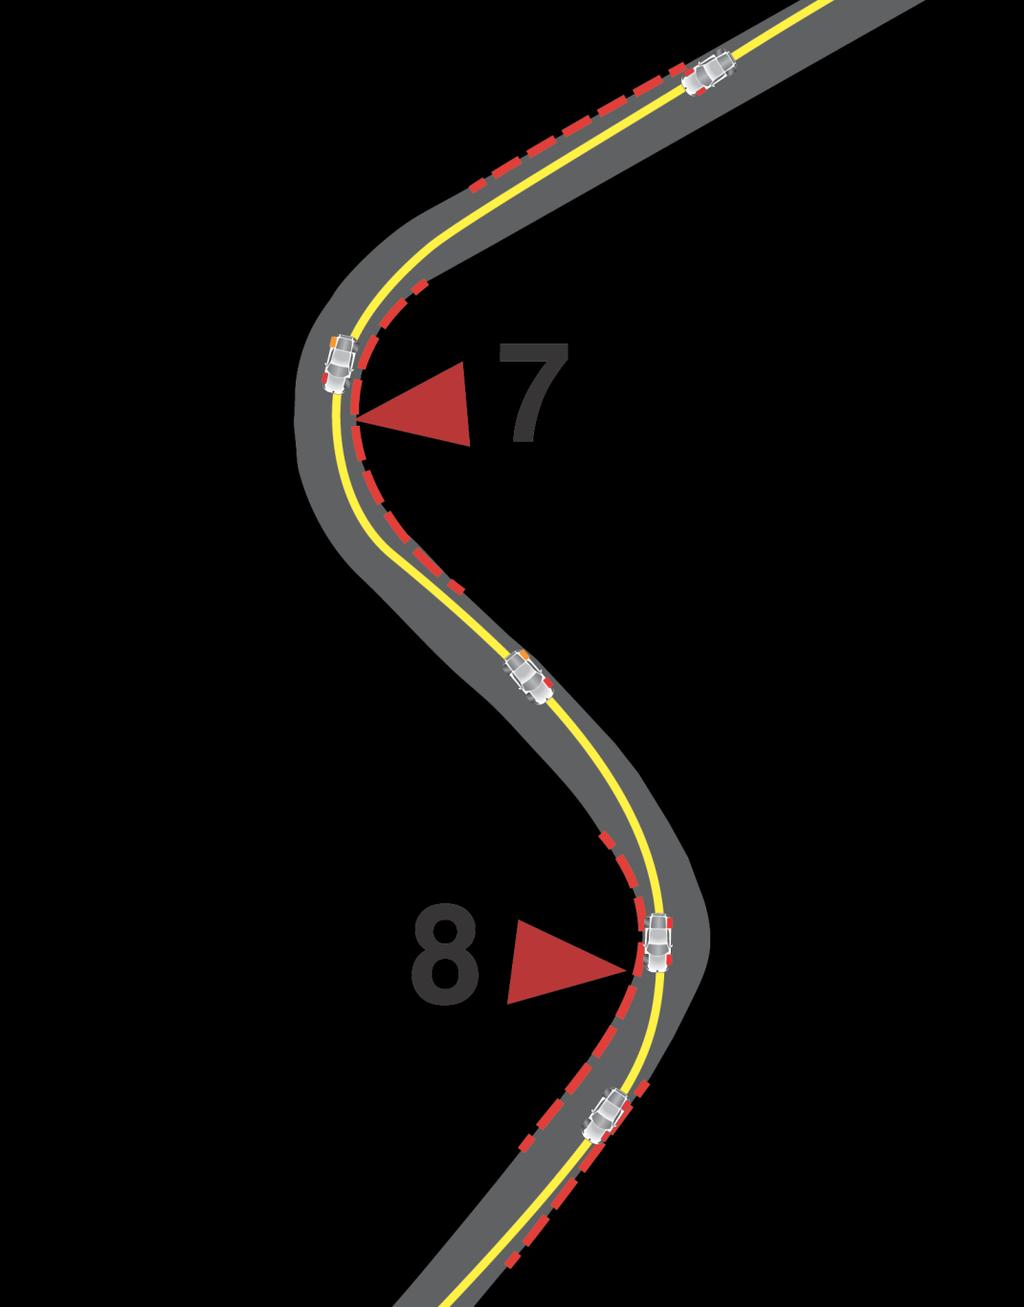 The approach to T 7 is the highest speed section of the track and hardest braking on the track. Learn to use the brake markers to help you plan this turn for braking and turn in.